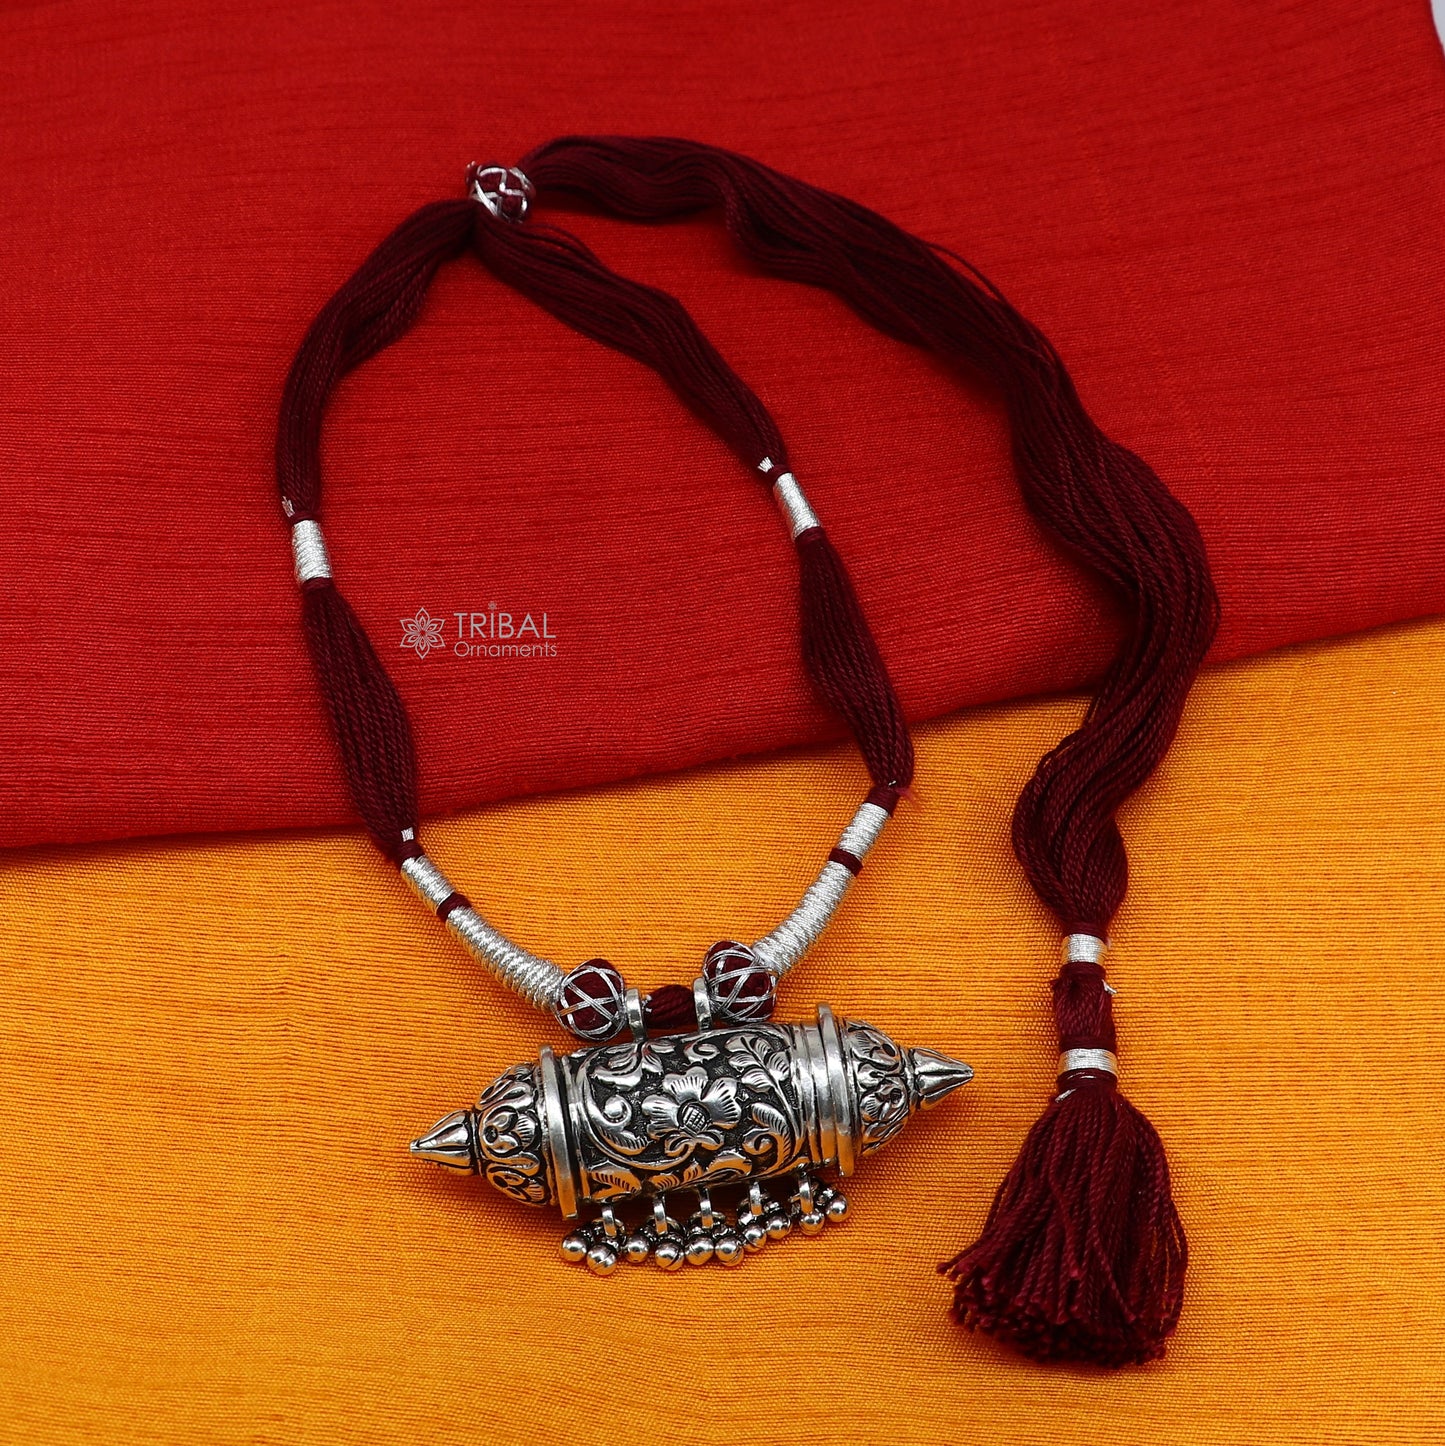 925 sterling silver amulet taviz pendant tribal ethnic necklace adjust with back thread knot, unique cultural mantra box jewelry set638 - TRIBAL ORNAMENTS